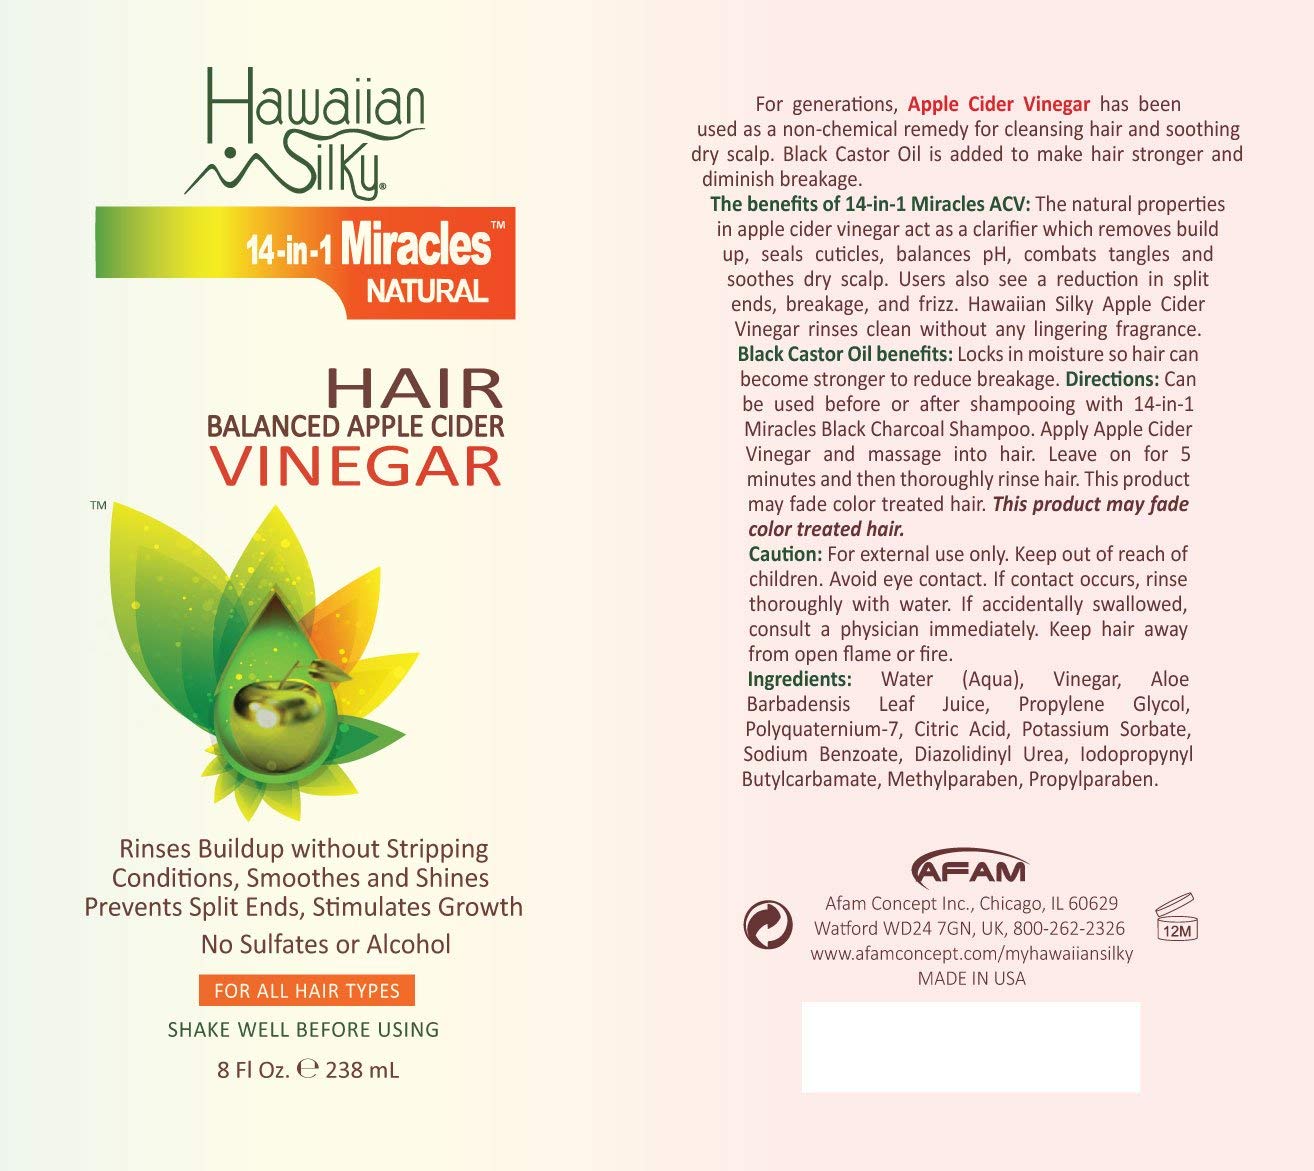 Hawaiian Silky 14-In-1 Miracles Apple Cider Vinegar Shampoo and Vinegar Combo : Everything Else